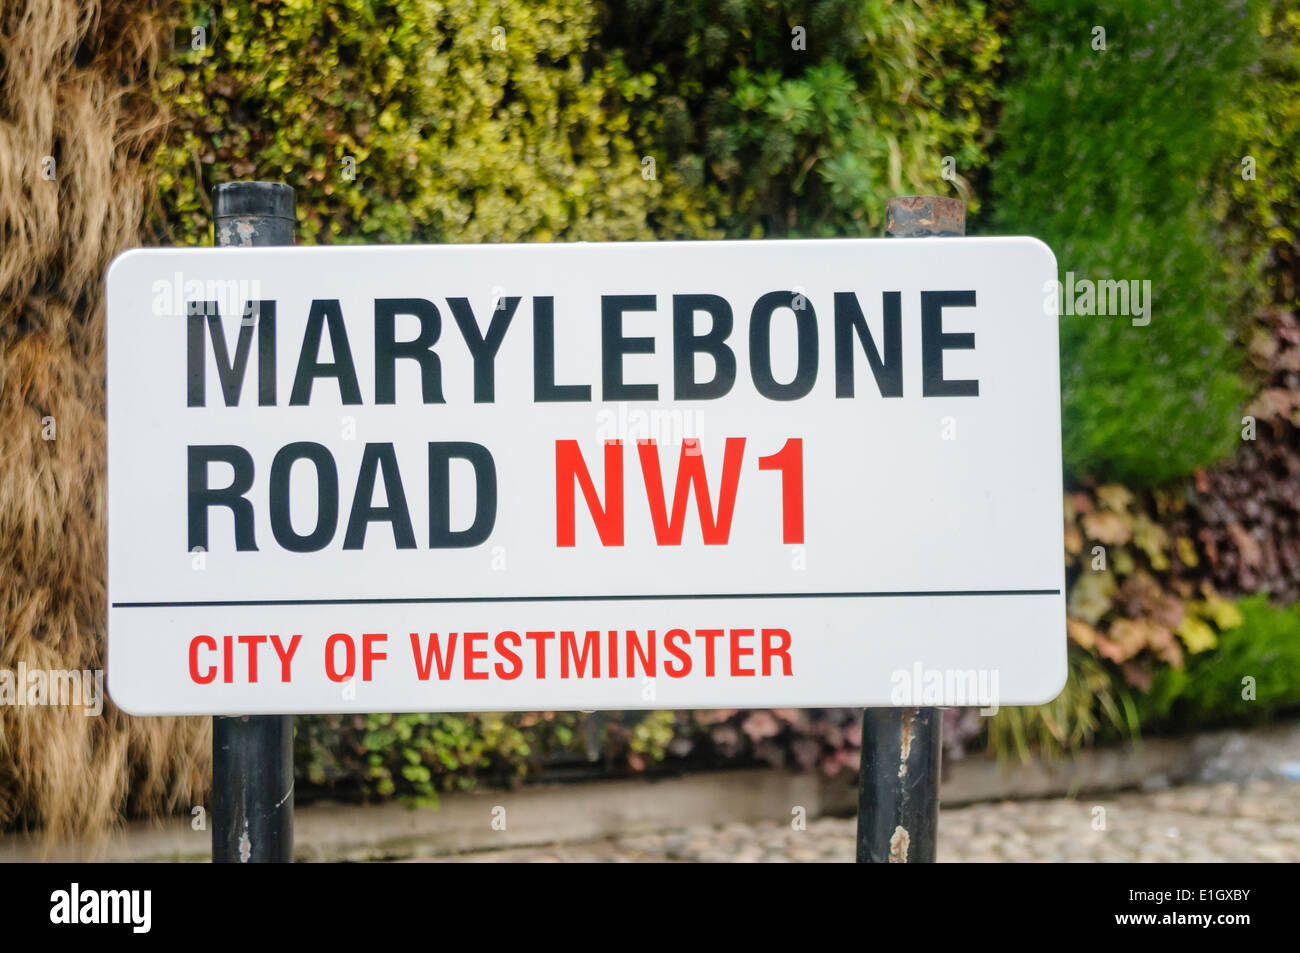 Road sign for Marylebone Road, City of Westminster, London Stock Photo